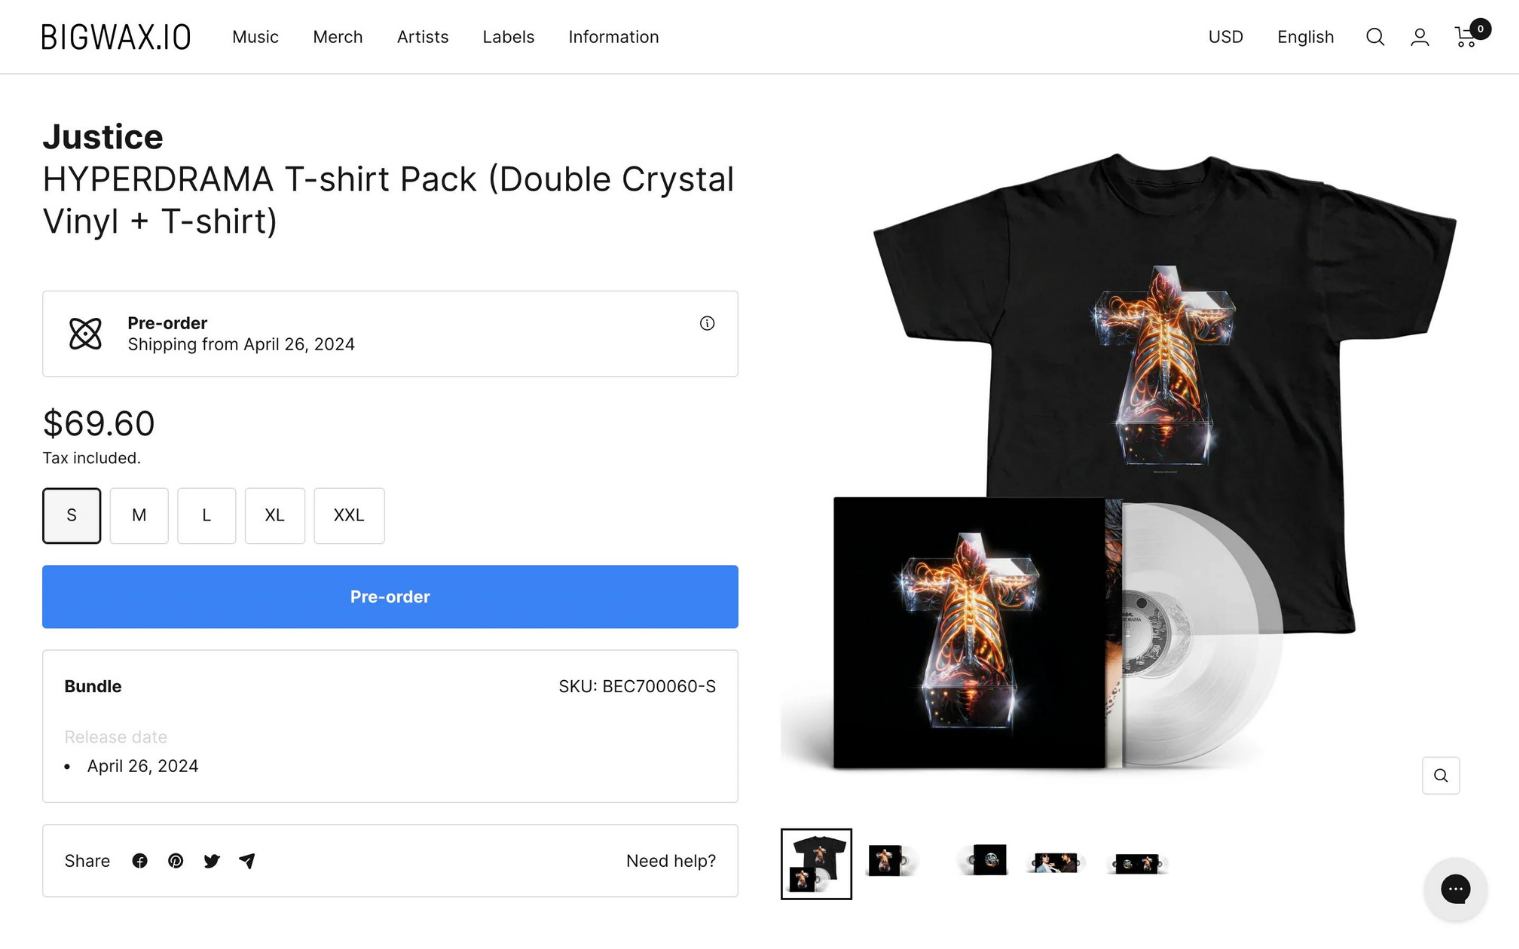 justice fan pack bundling music and merch on shopify reported by single